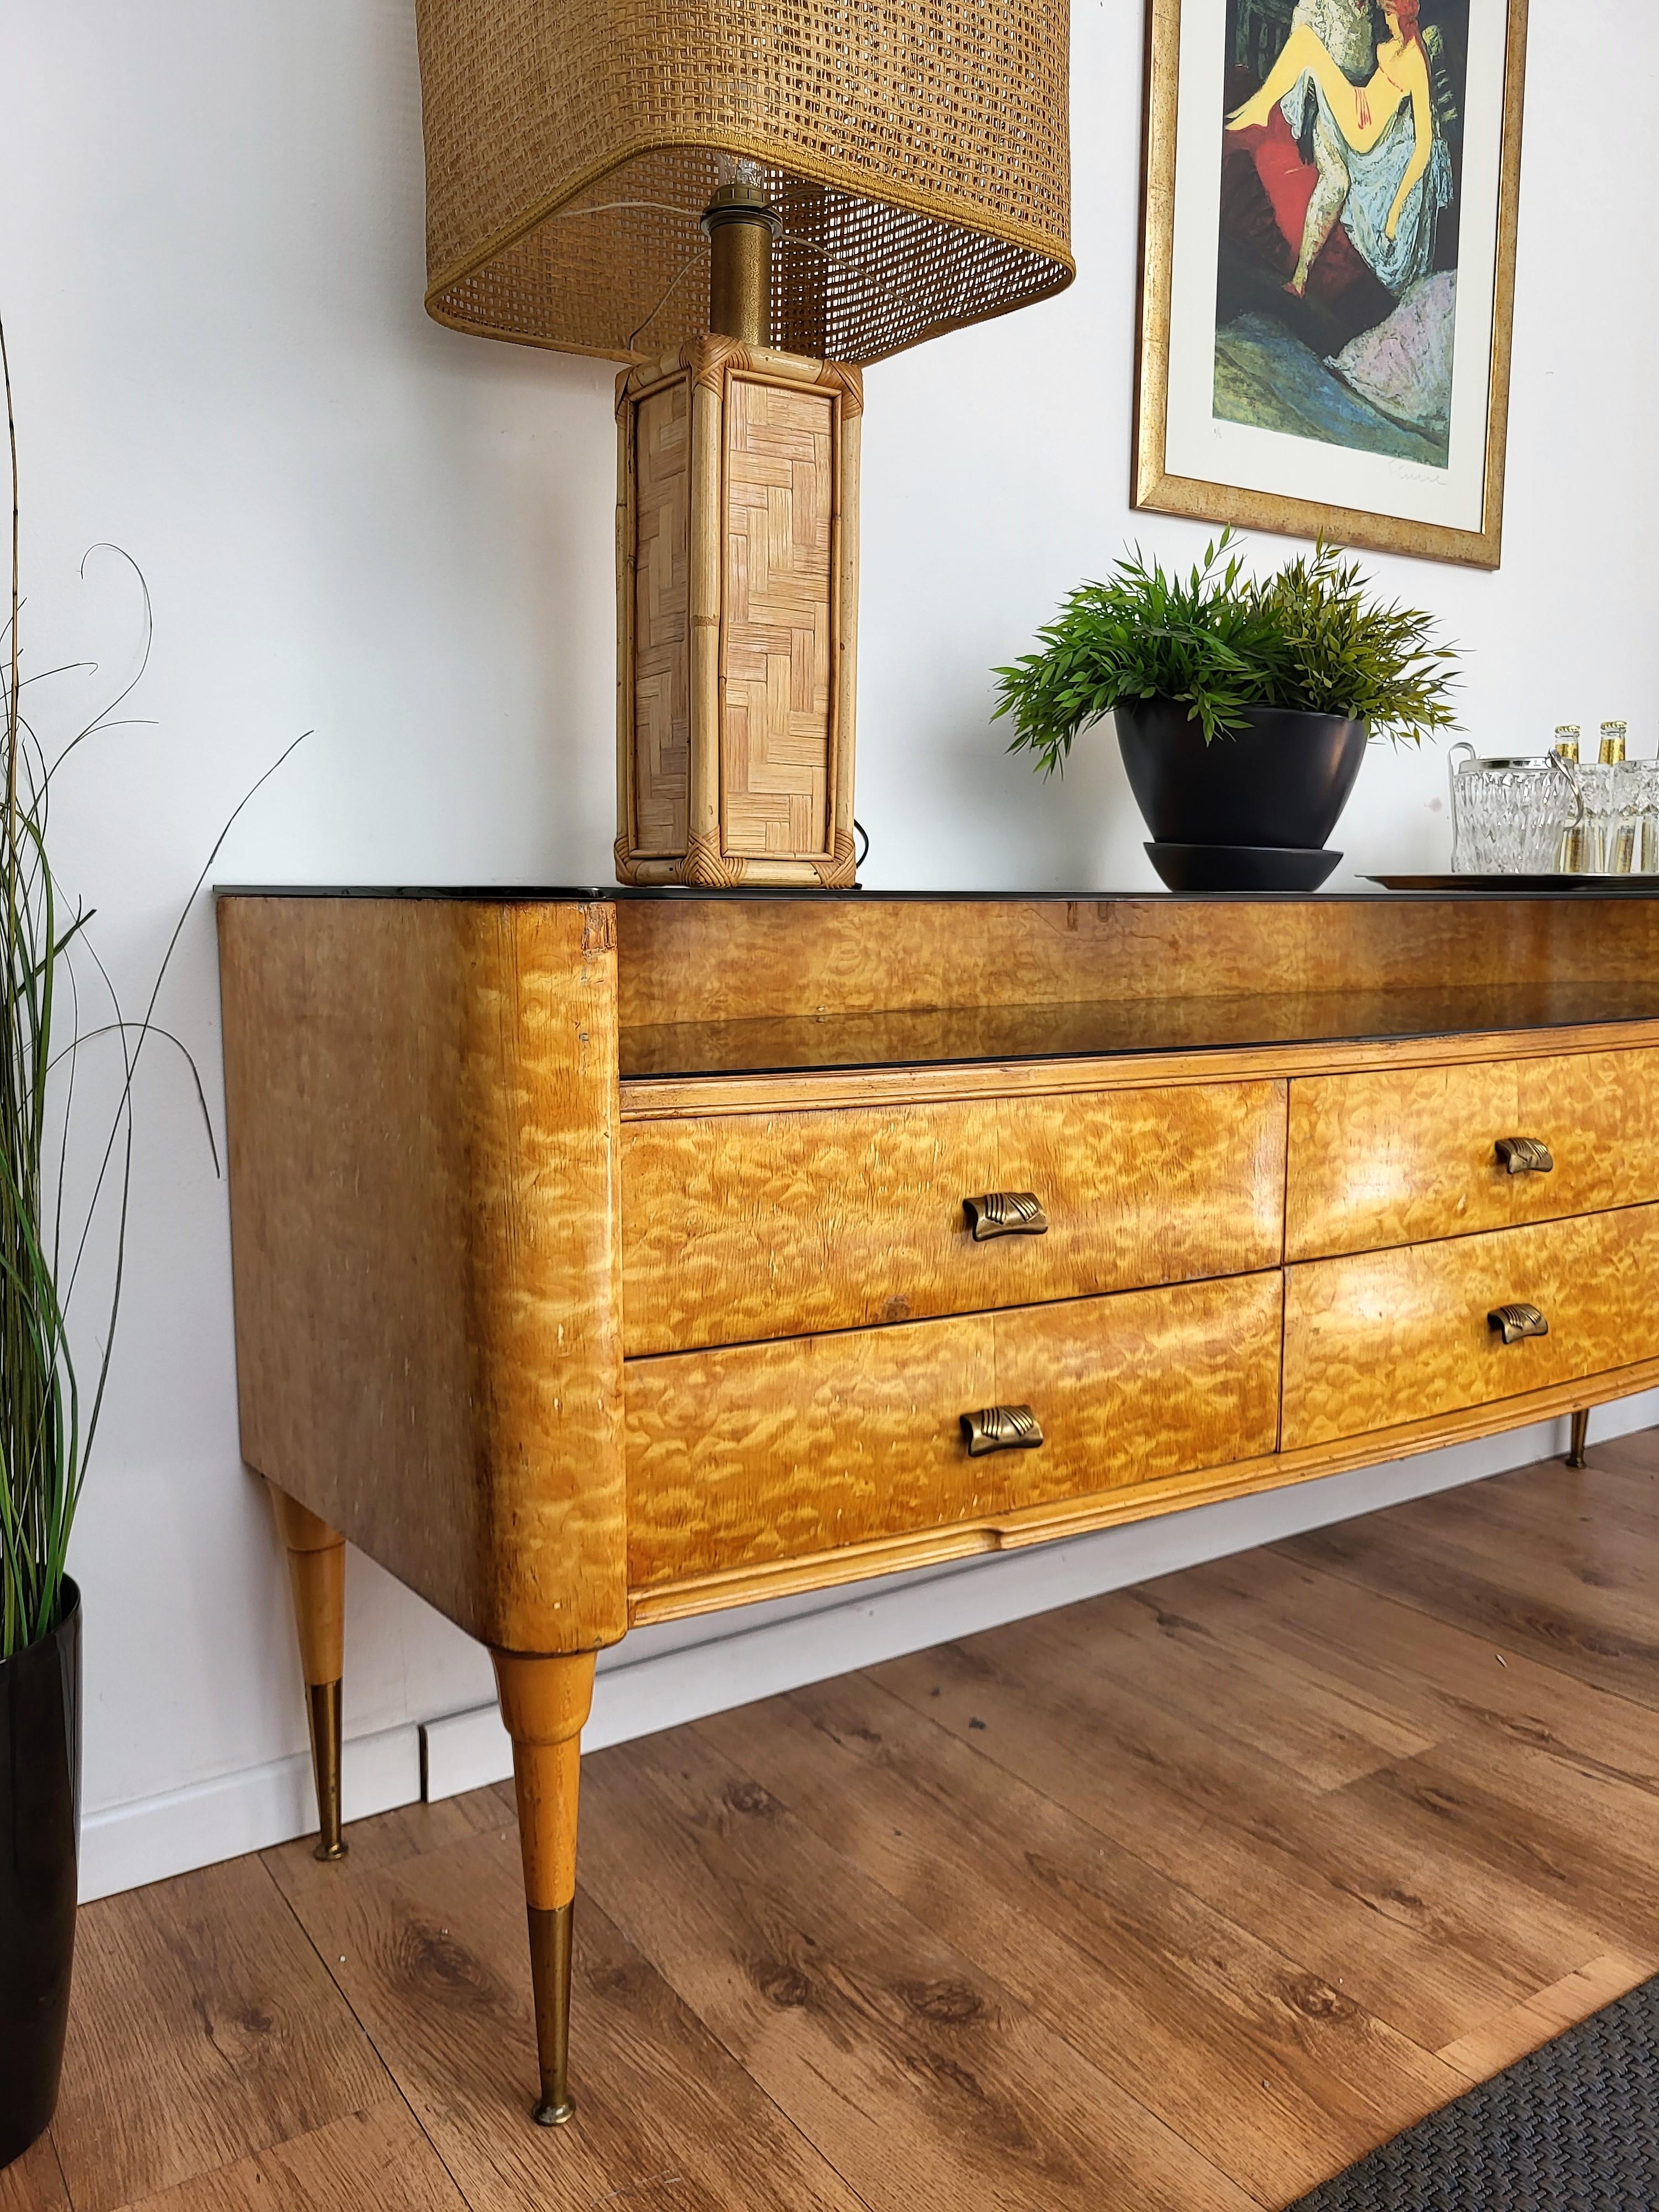 1950s Italian Art Deco Mid-Century Modern Wood Glass Brass Credenza Sideboard In Good Condition For Sale In Carimate, Como